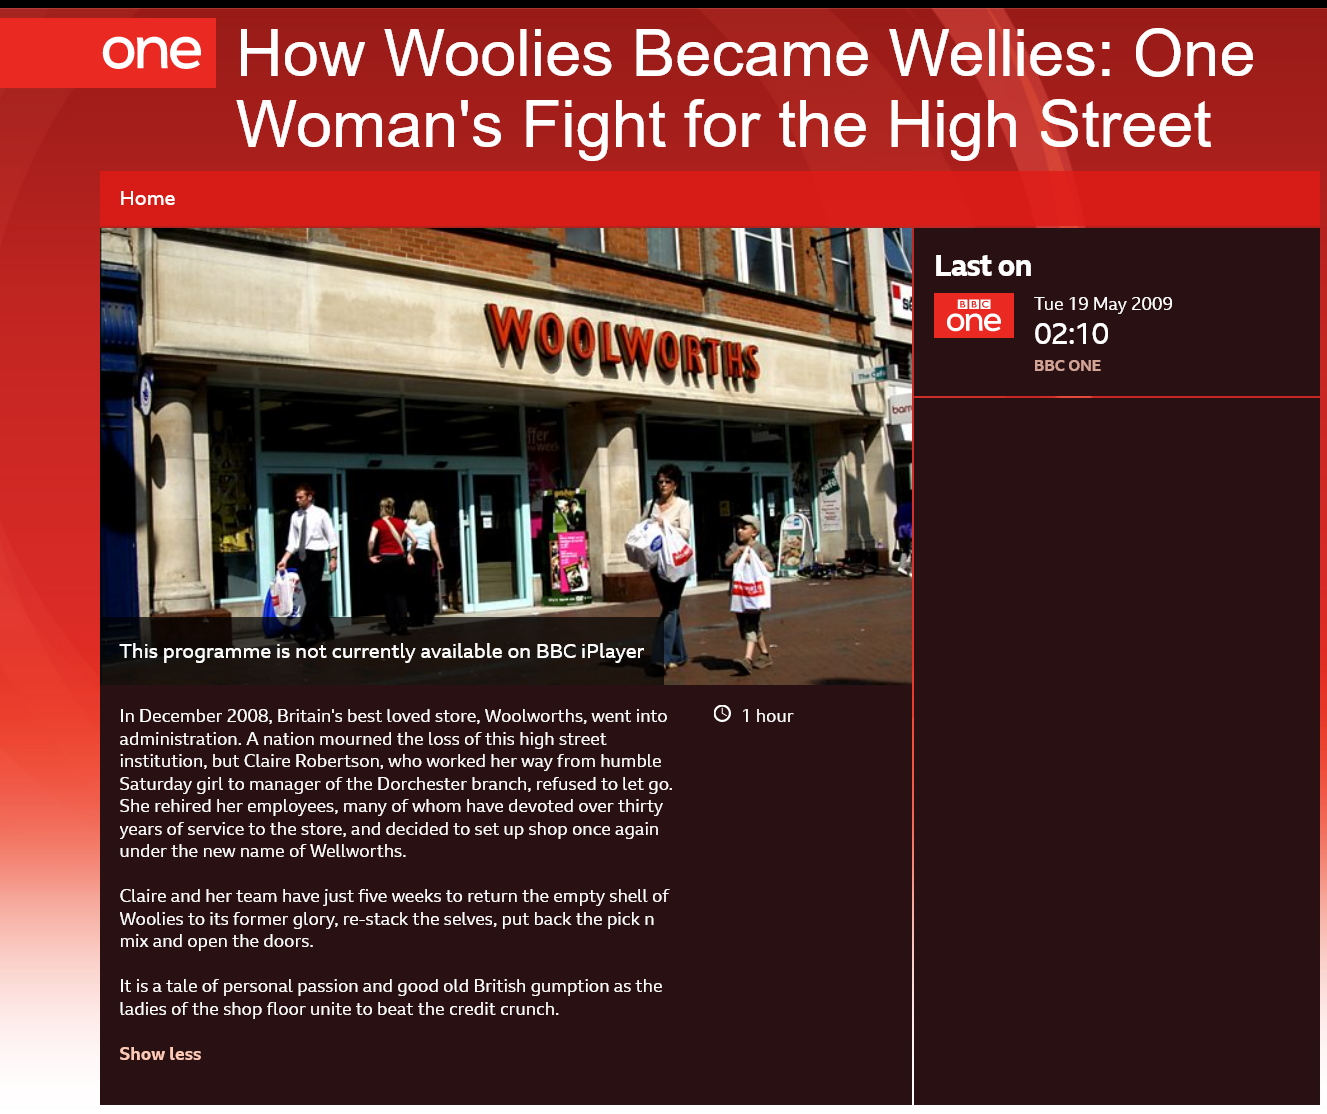 Screenshot 2022-07-15 at 17-27-19 BBC One - How Woolies Became Wellies One Woman's Fight for the High Street.png